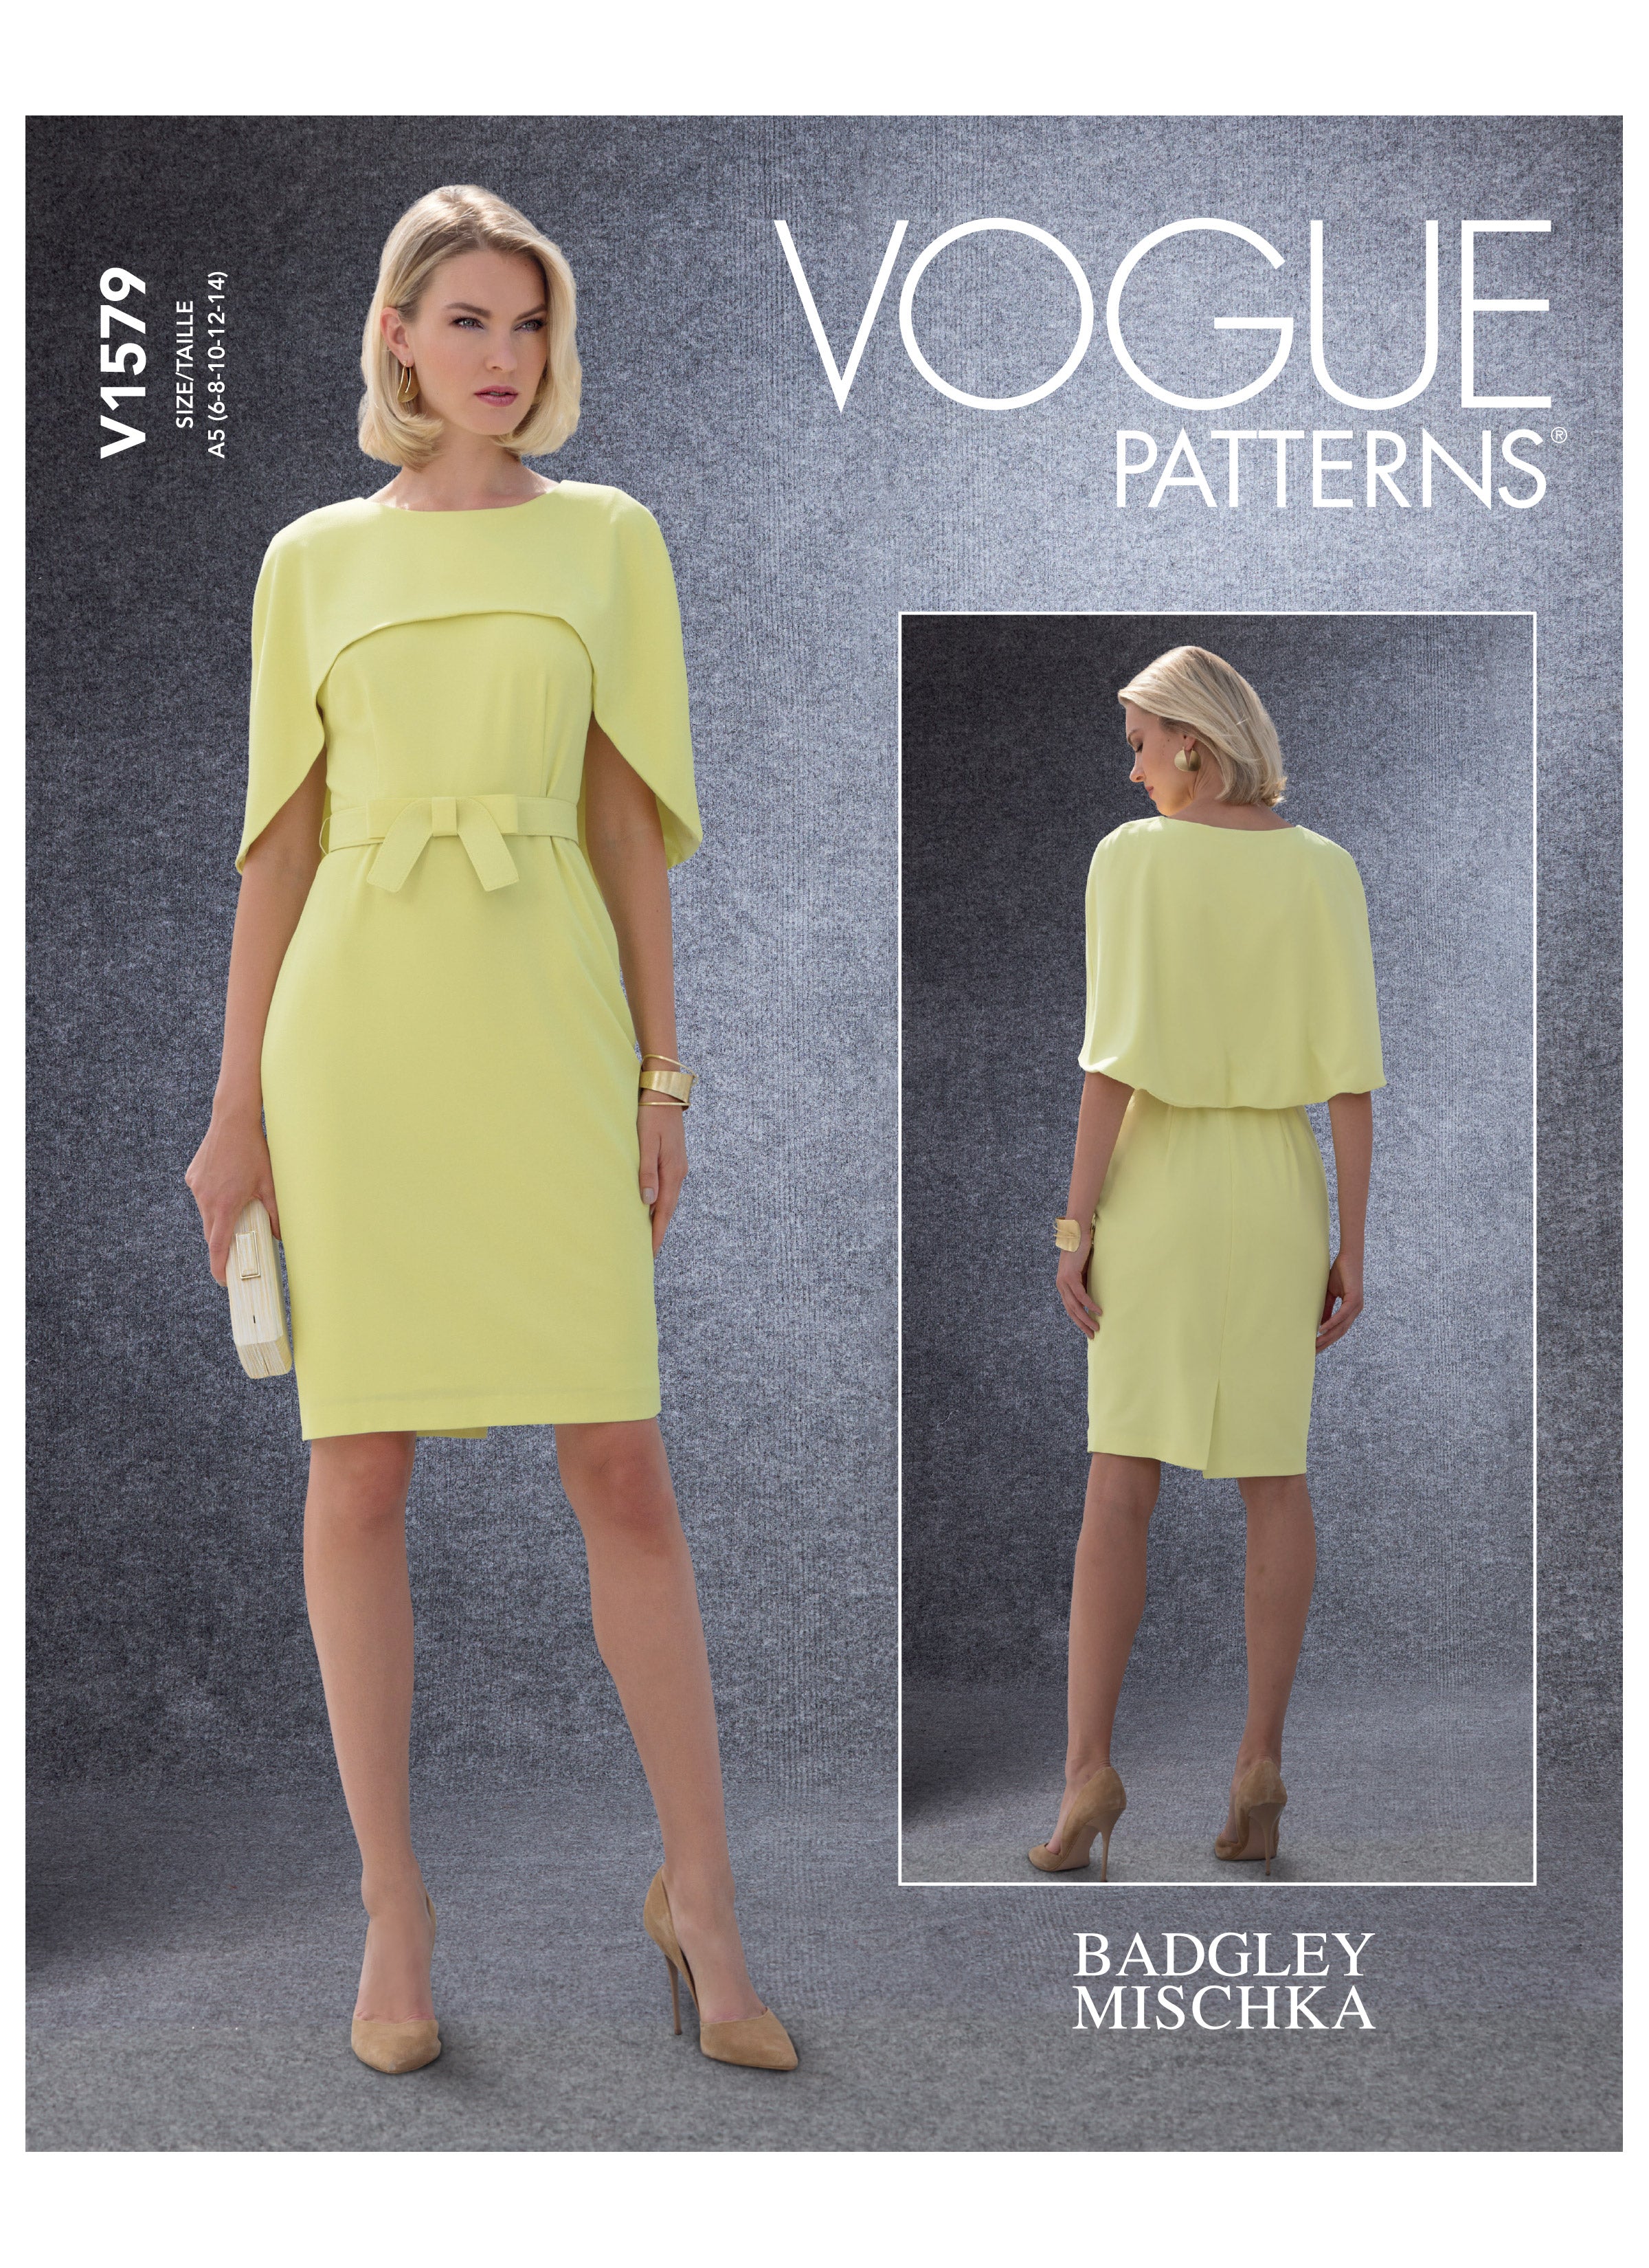 Vogue Pattern 1579 MISSES' PETITE DRESS from Jaycotts Sewing Supplies